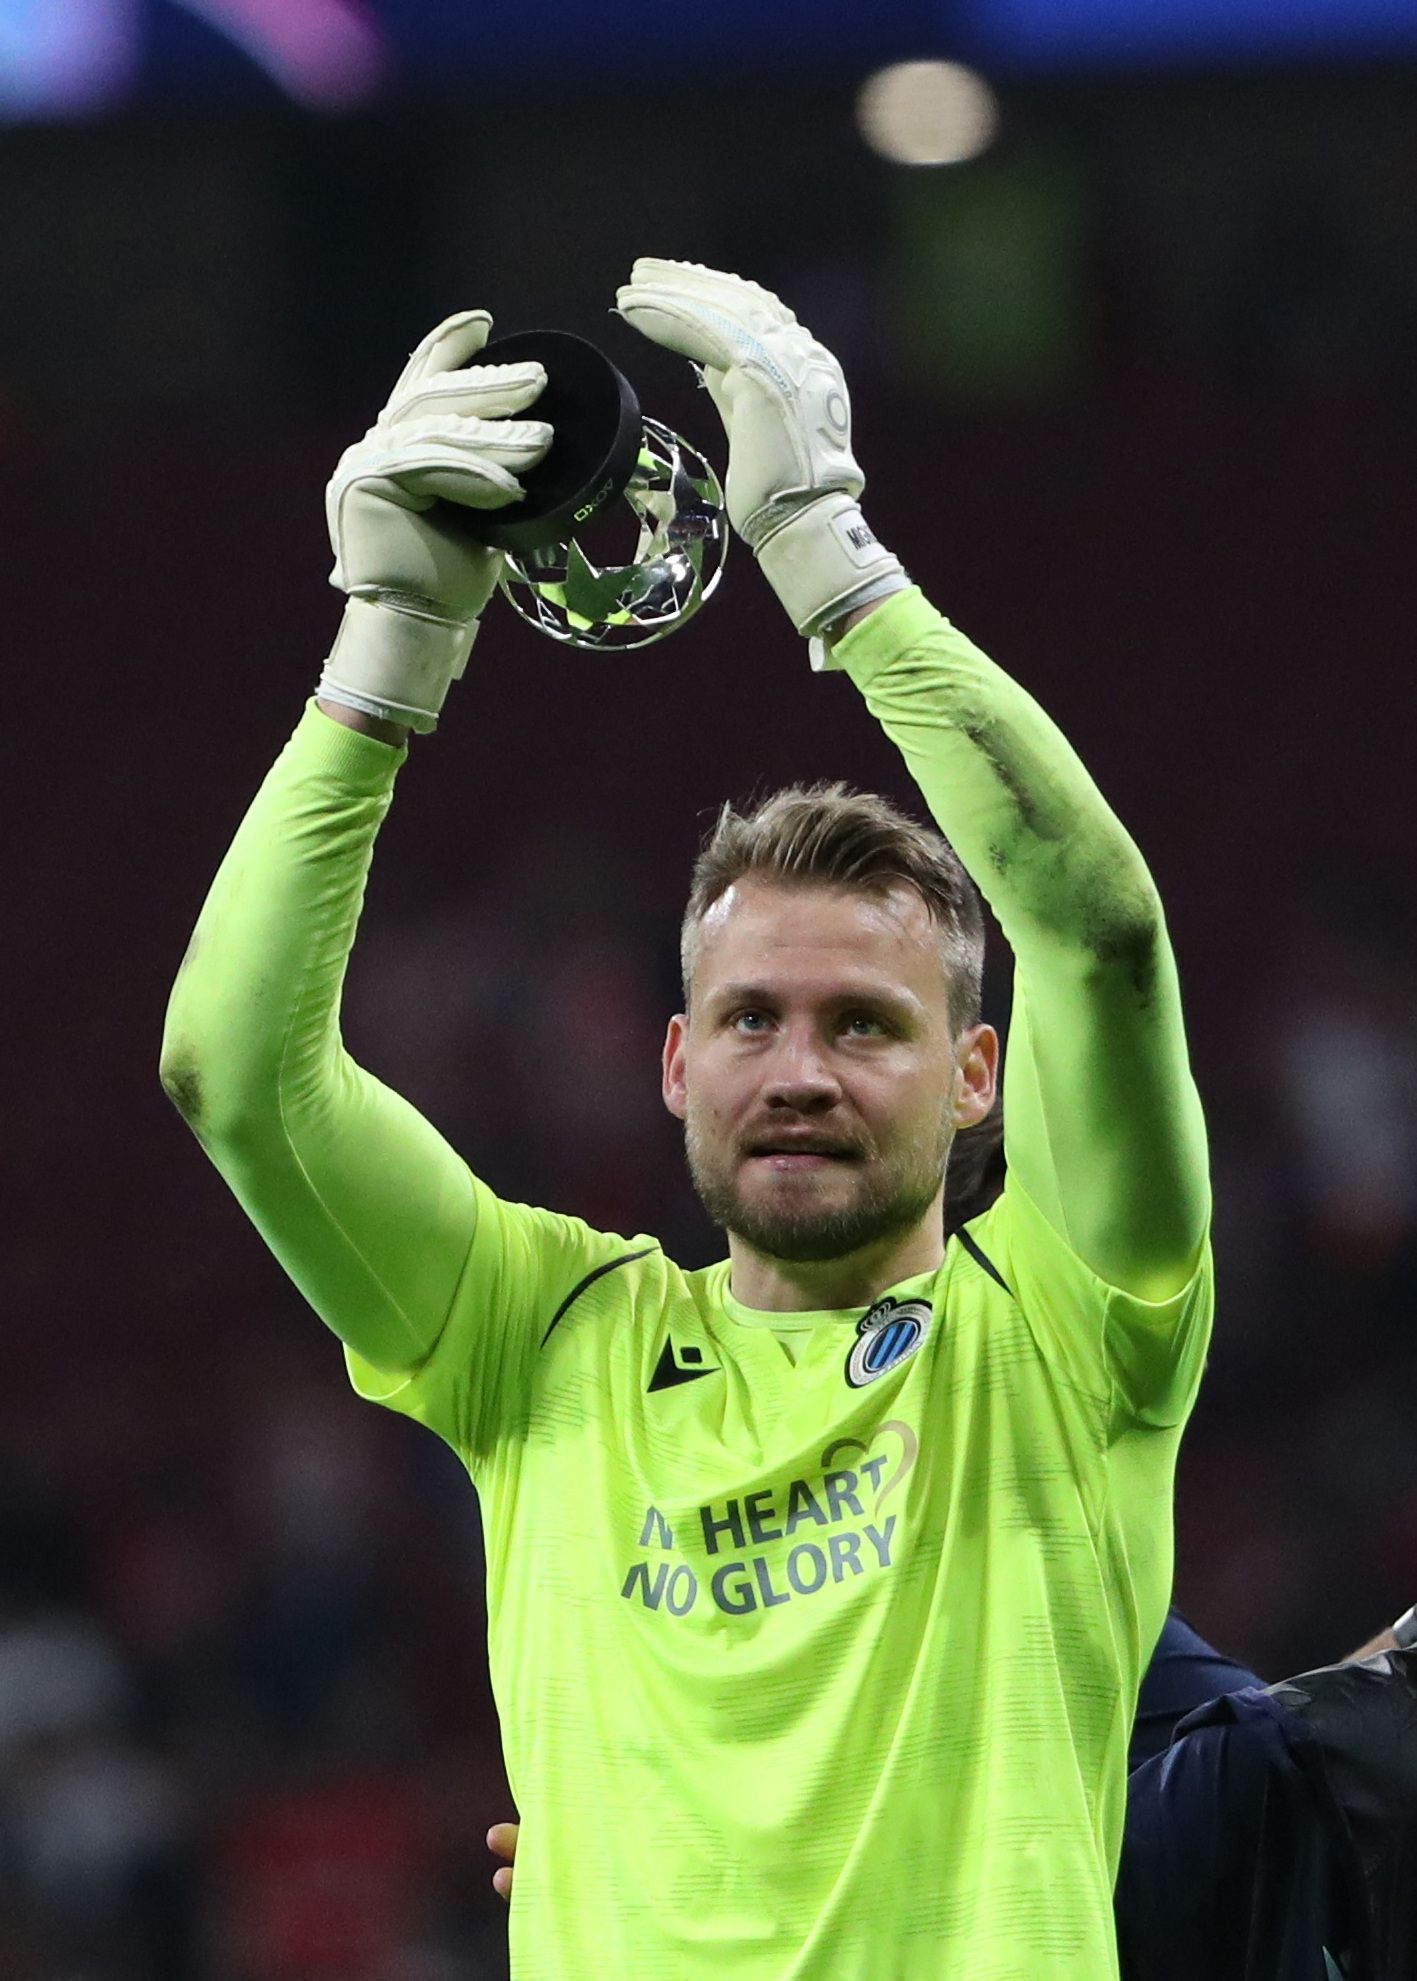 Brugge's Mignolet clapping.